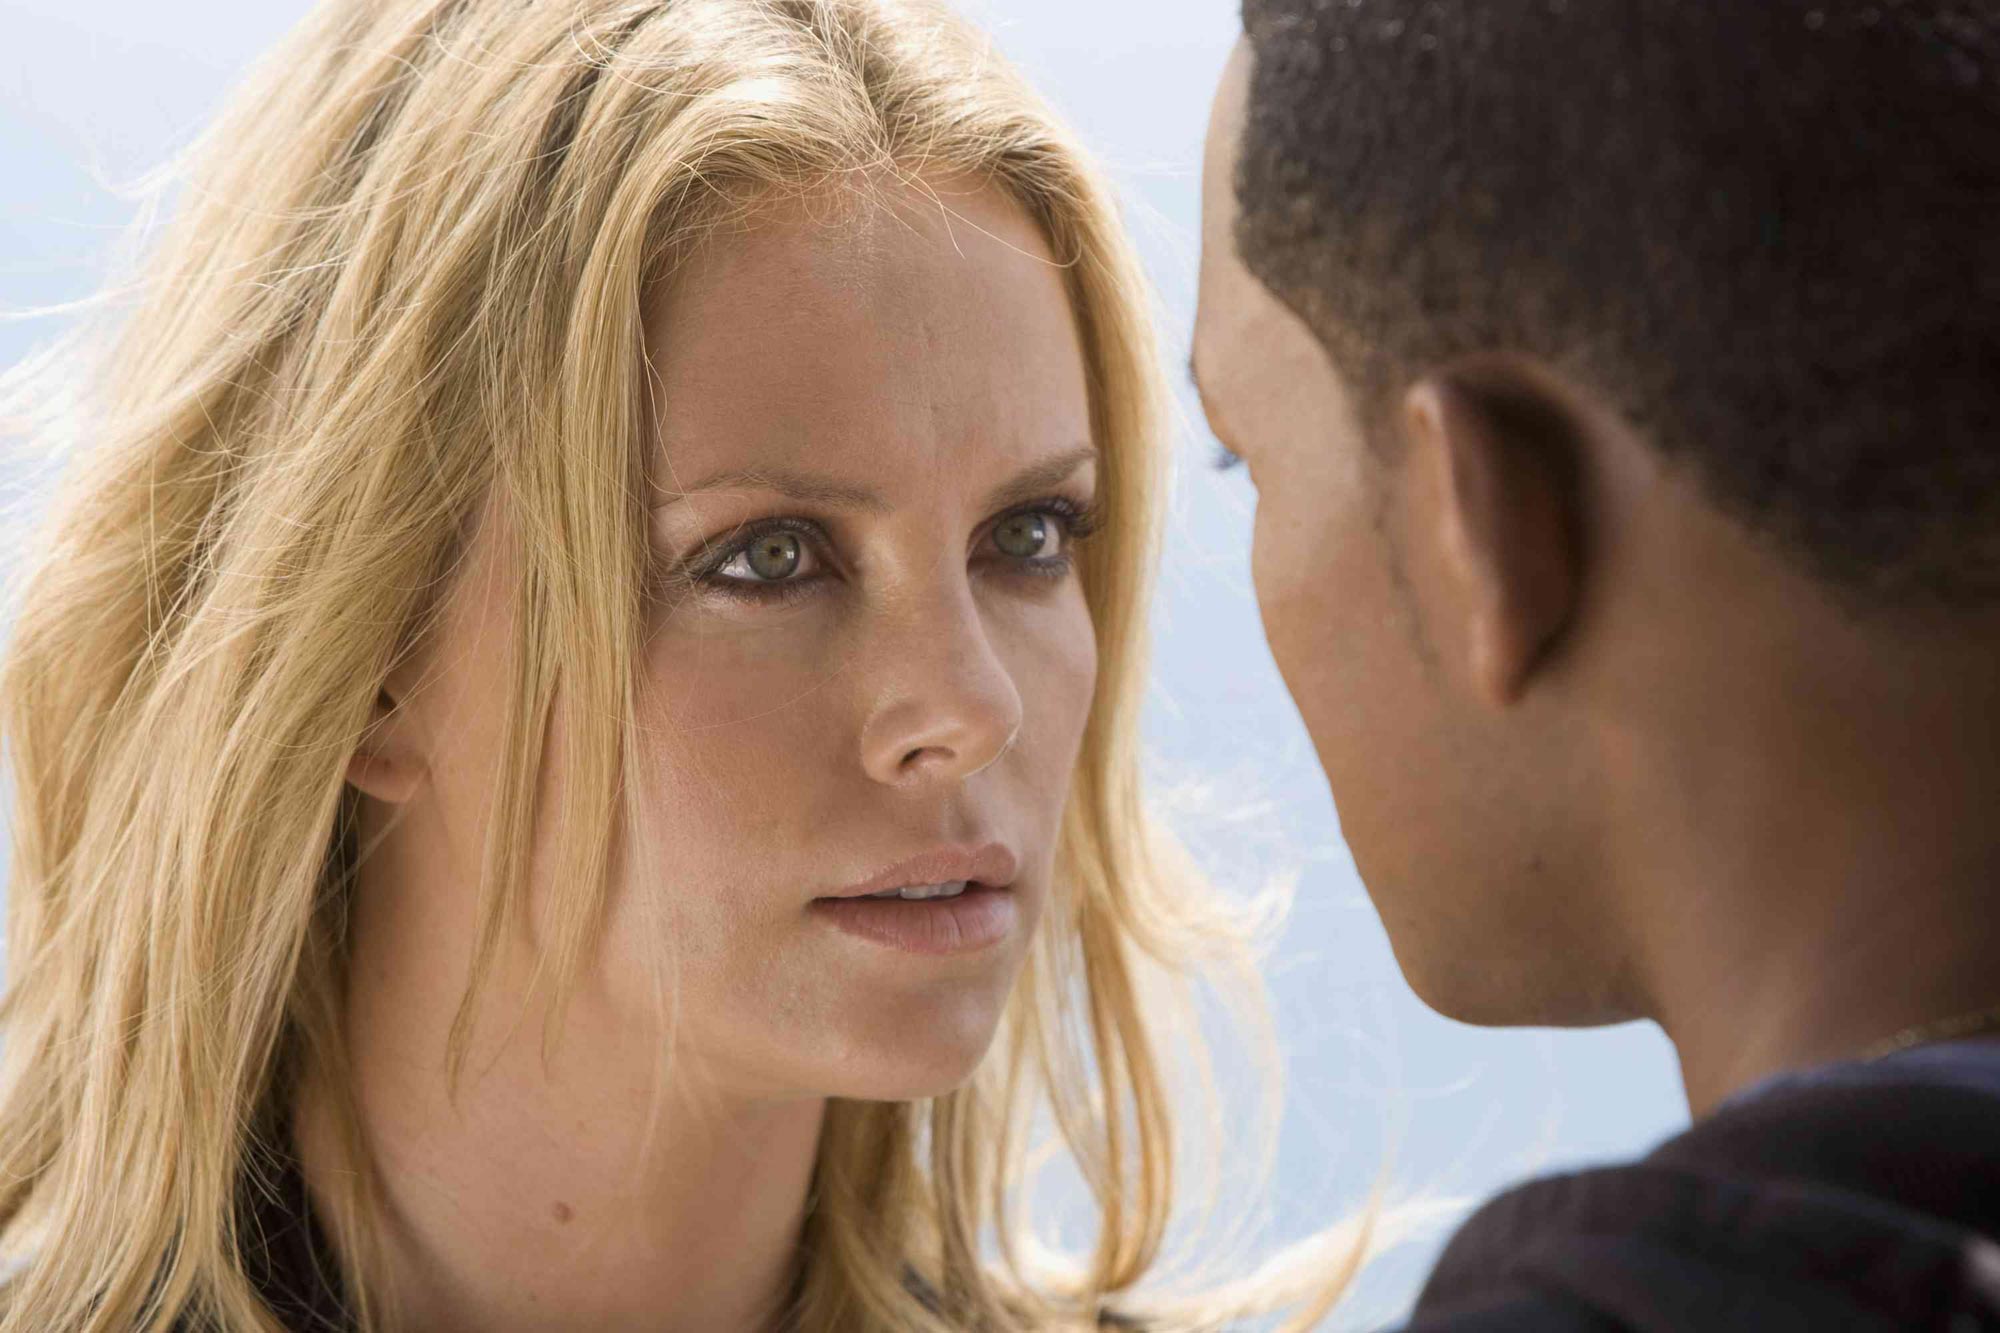 will-smith-and-charlize-theron-confirmed-for-hancock-2-filmofilia